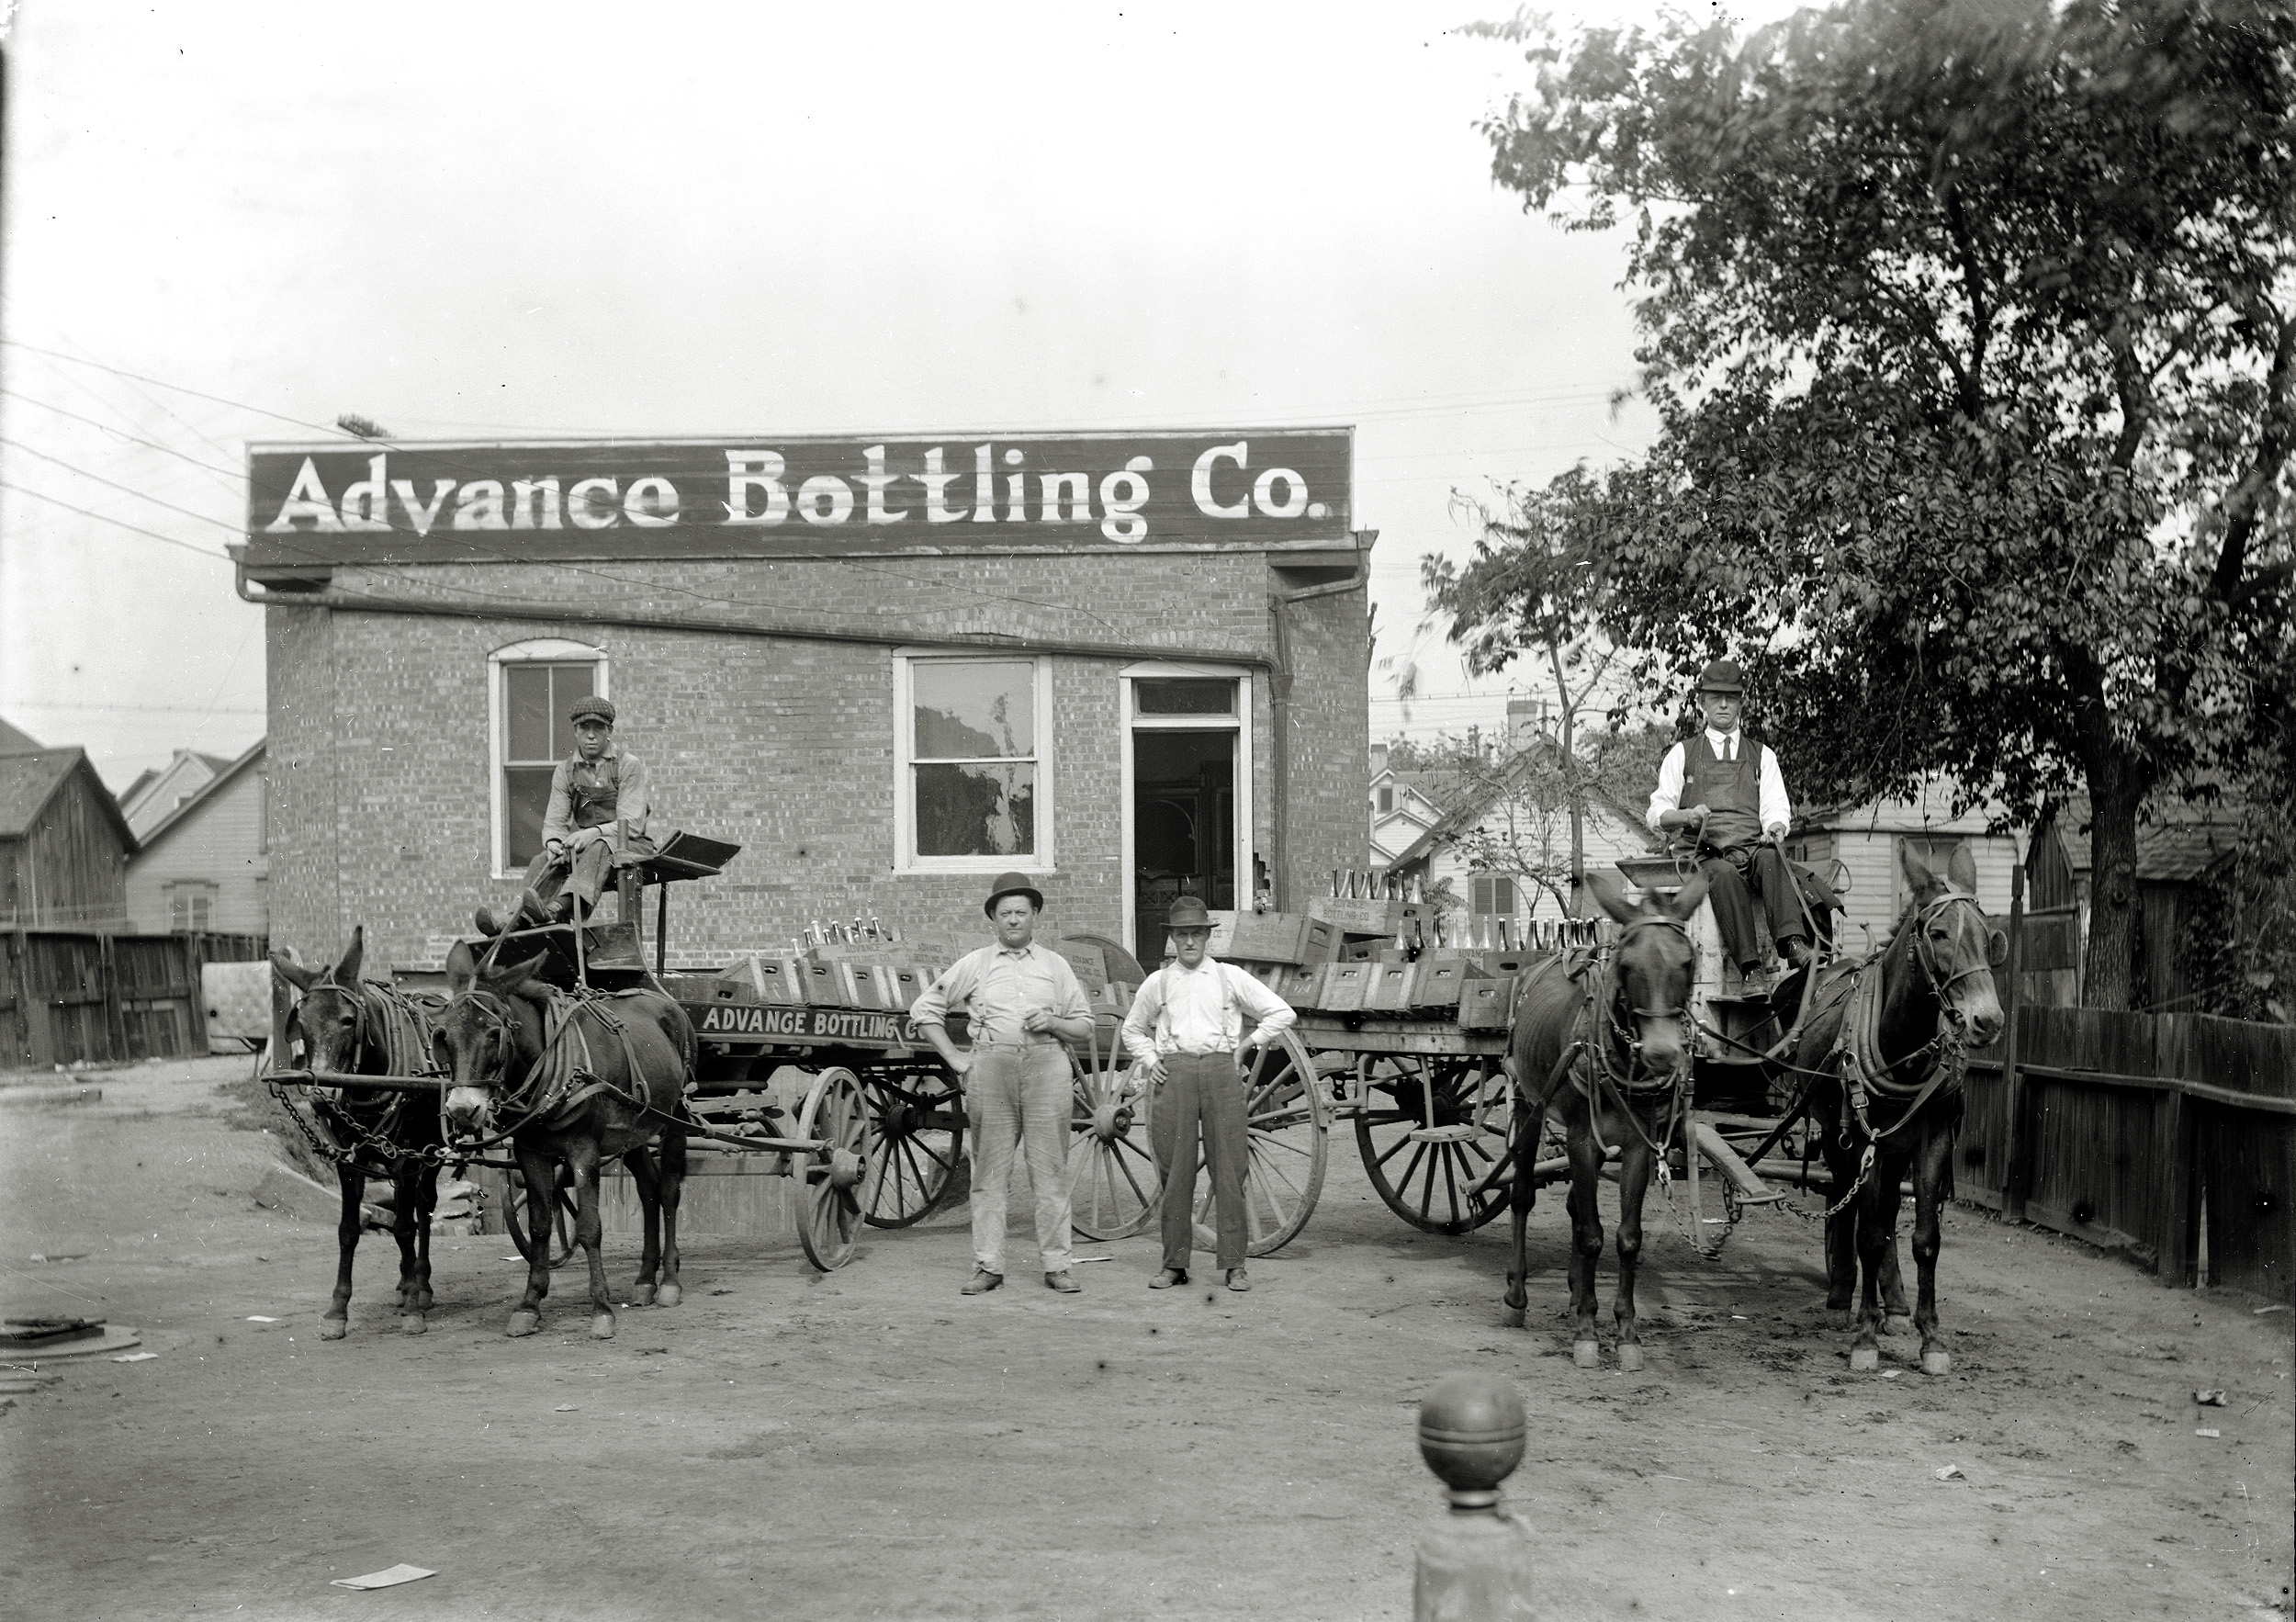 Advance Bottling Works, ABC brand Ginger Ale, Lemon, Strawberry, Grape and other fruit-flavored Soft Drinks, 311-313 Warner Avenue, Peoria, Illinois, circa 1915.

From Peoria City and County, Illinois: A Record of Settlement, Organization, Progress and Achievement, Volume 2, by James Montgomery Rice, 1912:

"William Dorey is at the head of one of the well known productive industries of Peoria — The Advance Bottling Works, manufacturers and bottlers of soft drinks. His life record had its beginning on the 17th of October, 1871, Peoria being his native city. He was left an orphan by the death of his parents when only six months old and was adopted by a family that reared him. His youthful days were passed in this city and he attended the public schools, thus acquiring his education. He afterward engaged in driving a team and later became a street car conductor. He turned from this to enter the ice business and subsequently he engaged in dealing in coal. His next venture was in the feed business and at one time he dealt in gasoline and oil but sold out in that line to engage in the liquor trade, in which he continued in Peoria for six years, then in the manufacture and bottling of soft drinks at No. 313 Warner Avenue." (Permission granted and courtesy of Peoria Historical Society Collections) View full size.